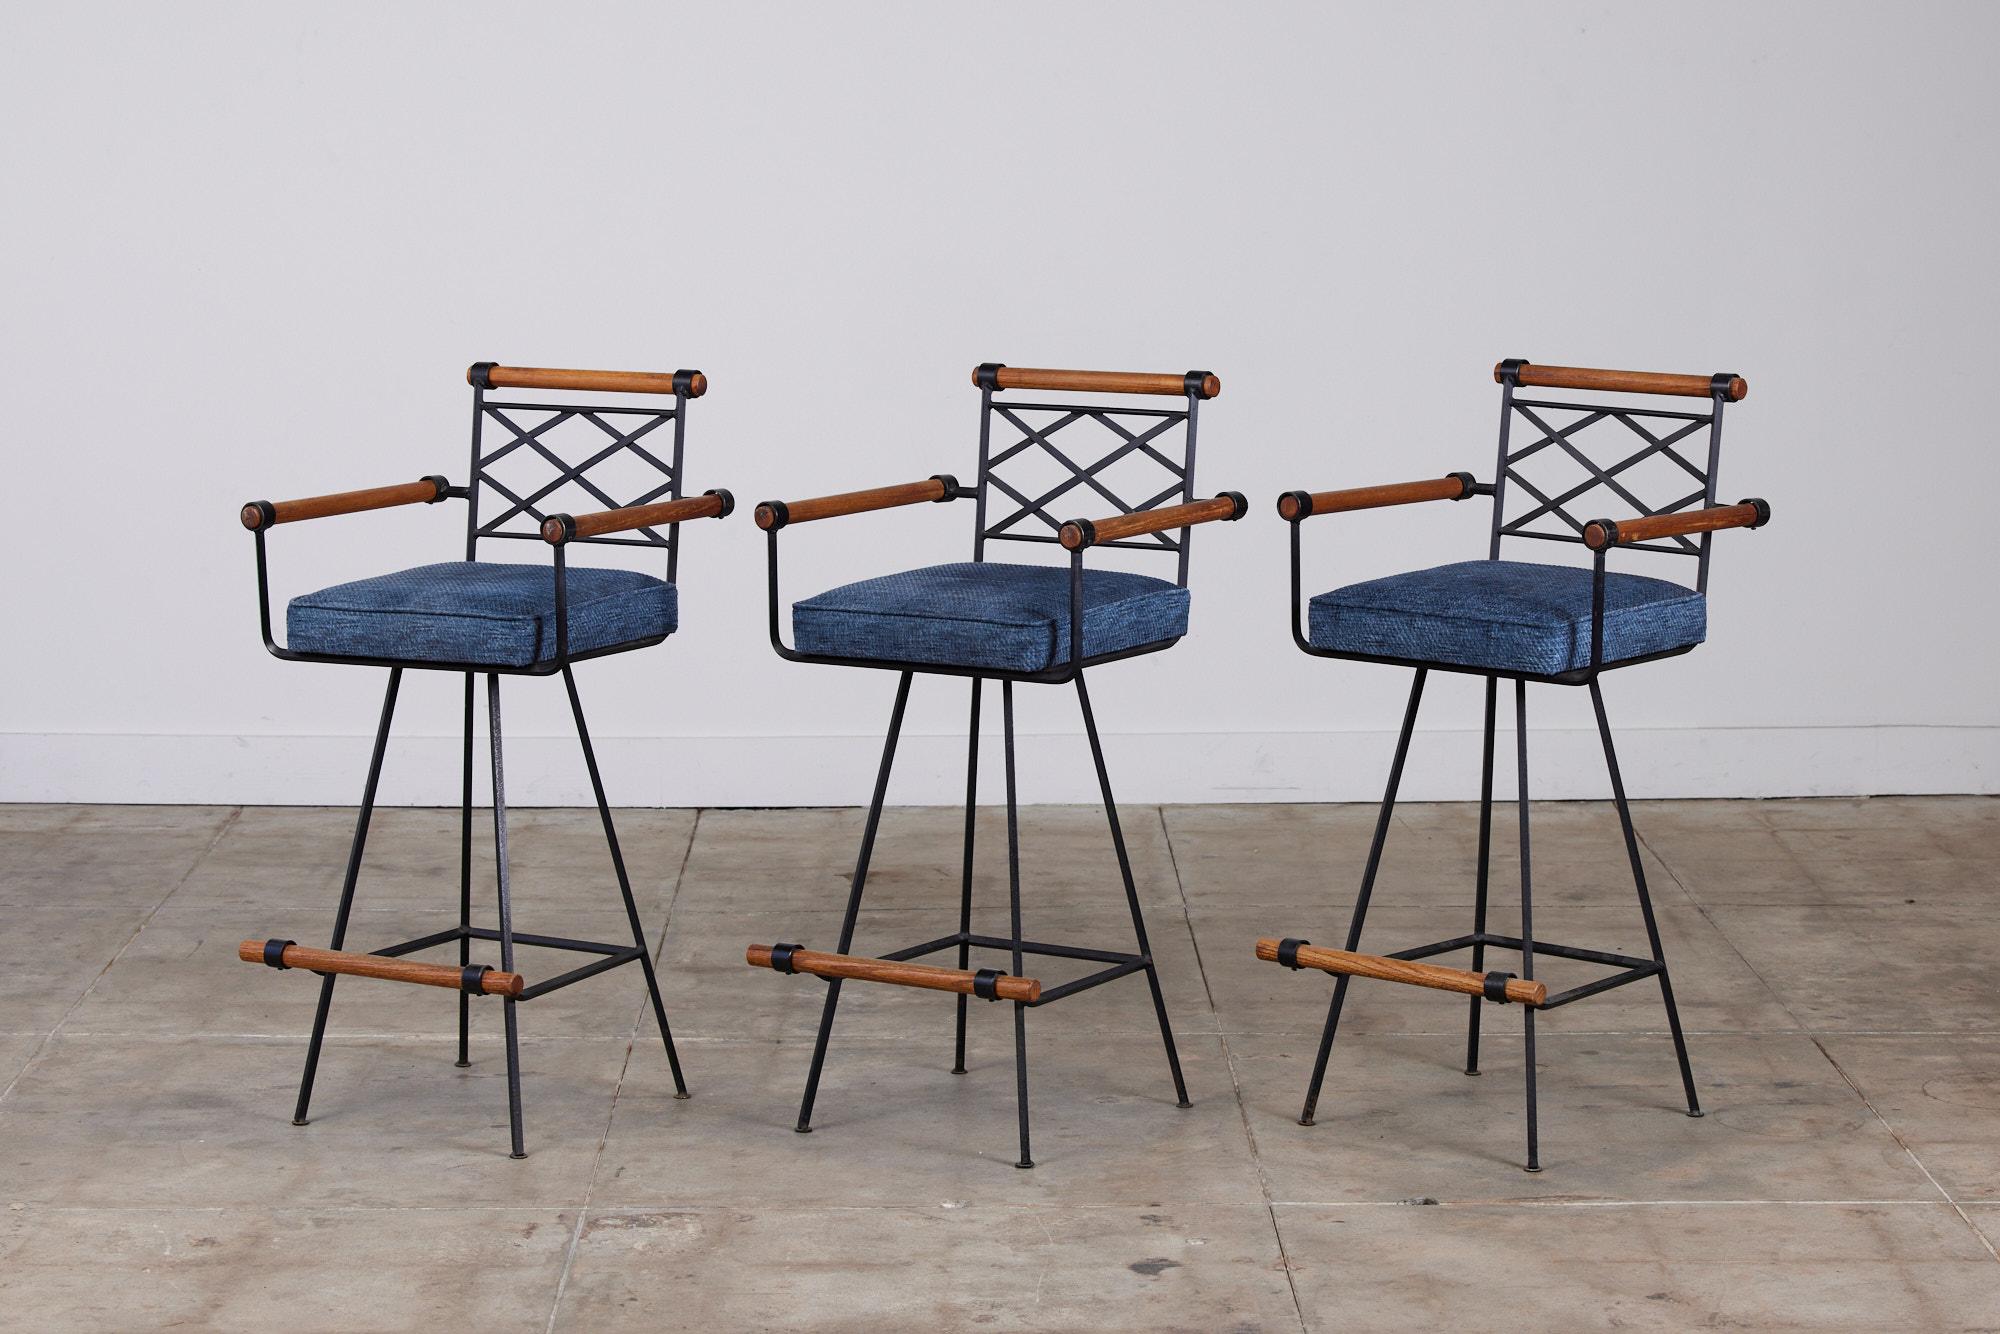 A set of three bar stools for Inca Products, USA, c.1960s in the style of Cleo Baldon. The chairs feature a wrought iron frame with lattice detailed seat backs. Each stool has four long delicate wrought iron legs and a swivel chair. The seats are